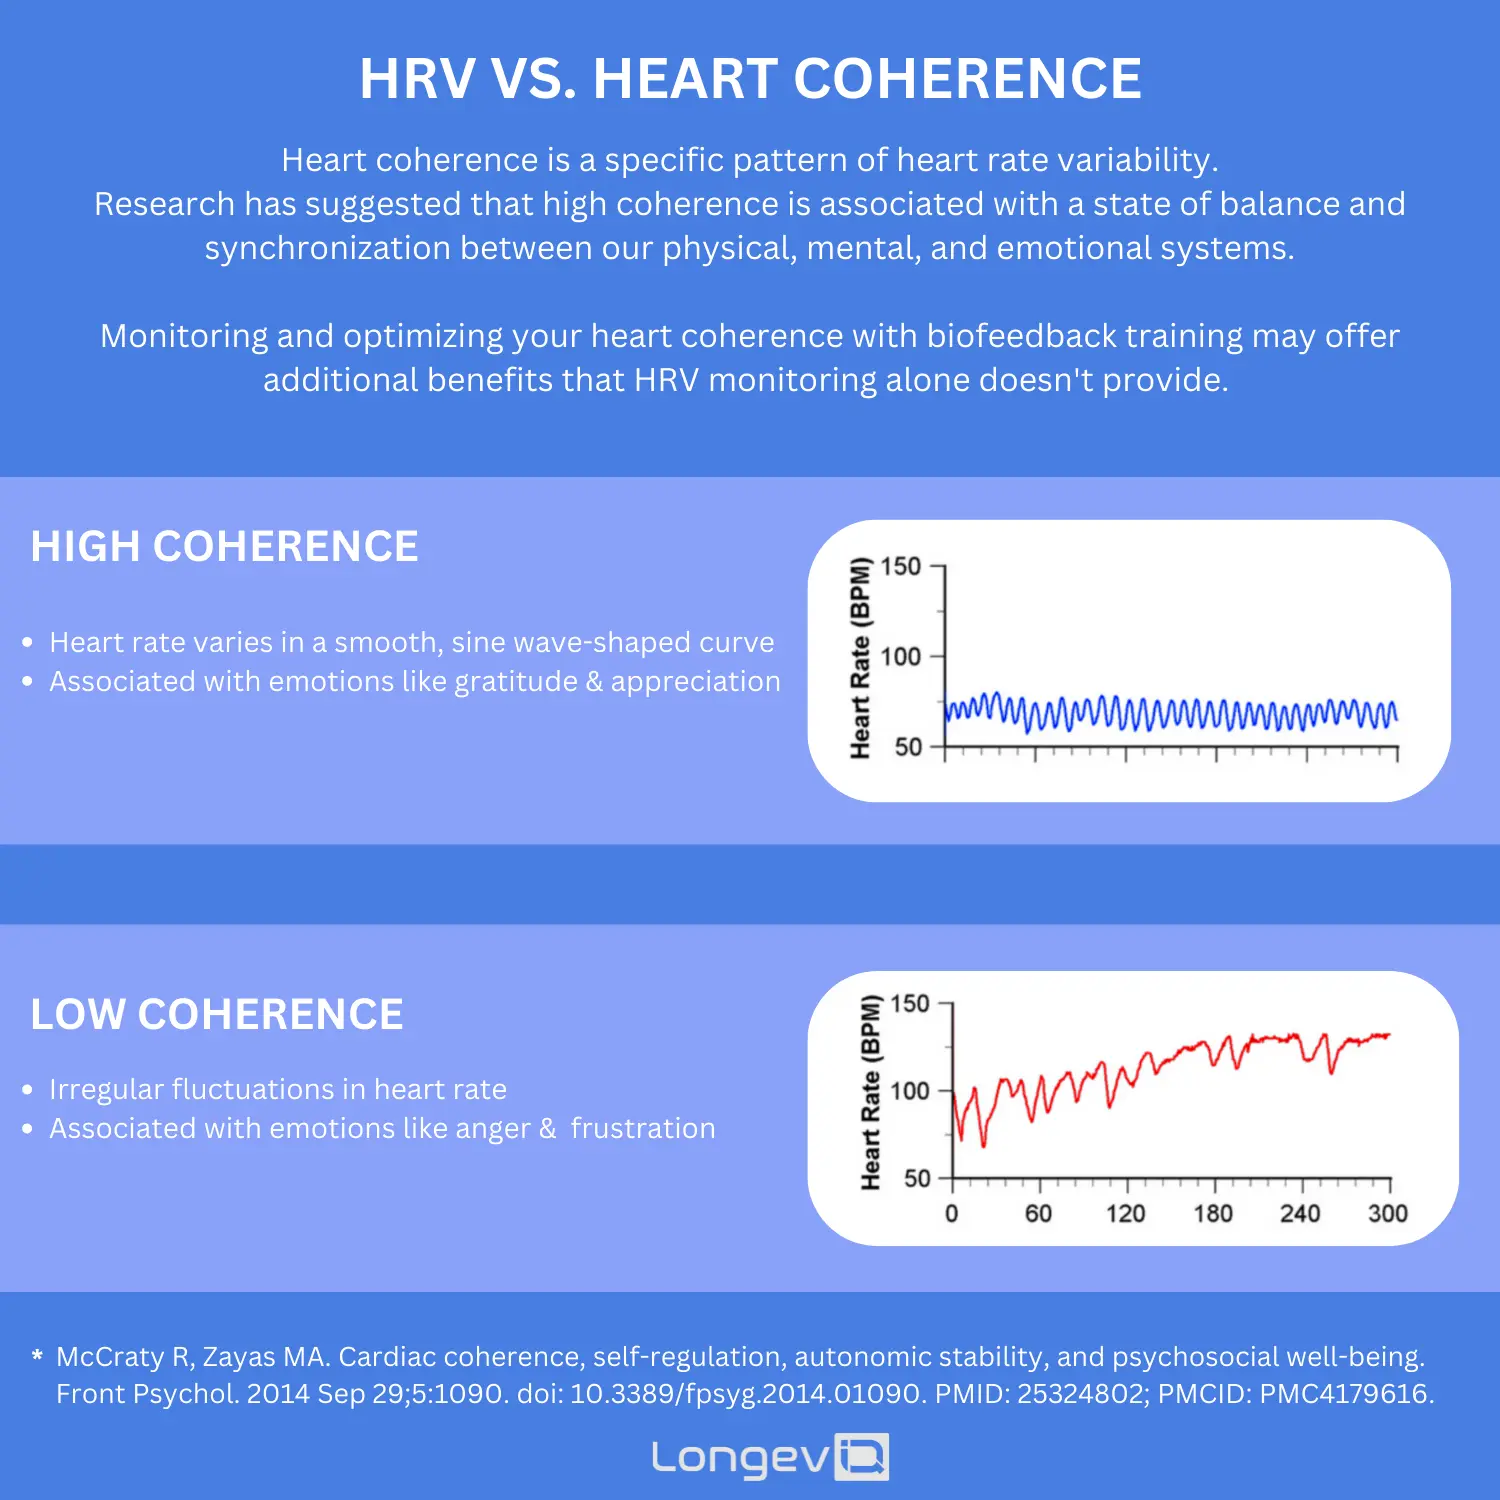 The difference between HRV and Heart Coherence: Heart coherence is a specific pattern of heart rate variability. Research has suggested that high coherence is associated with a state of balance and synchronization between our physical, mental, and emotional systems. Monitoring and optimizing your heart coherence with biofeedback training may offer additional benefits that HRV monitoring alone doesn't provide. 